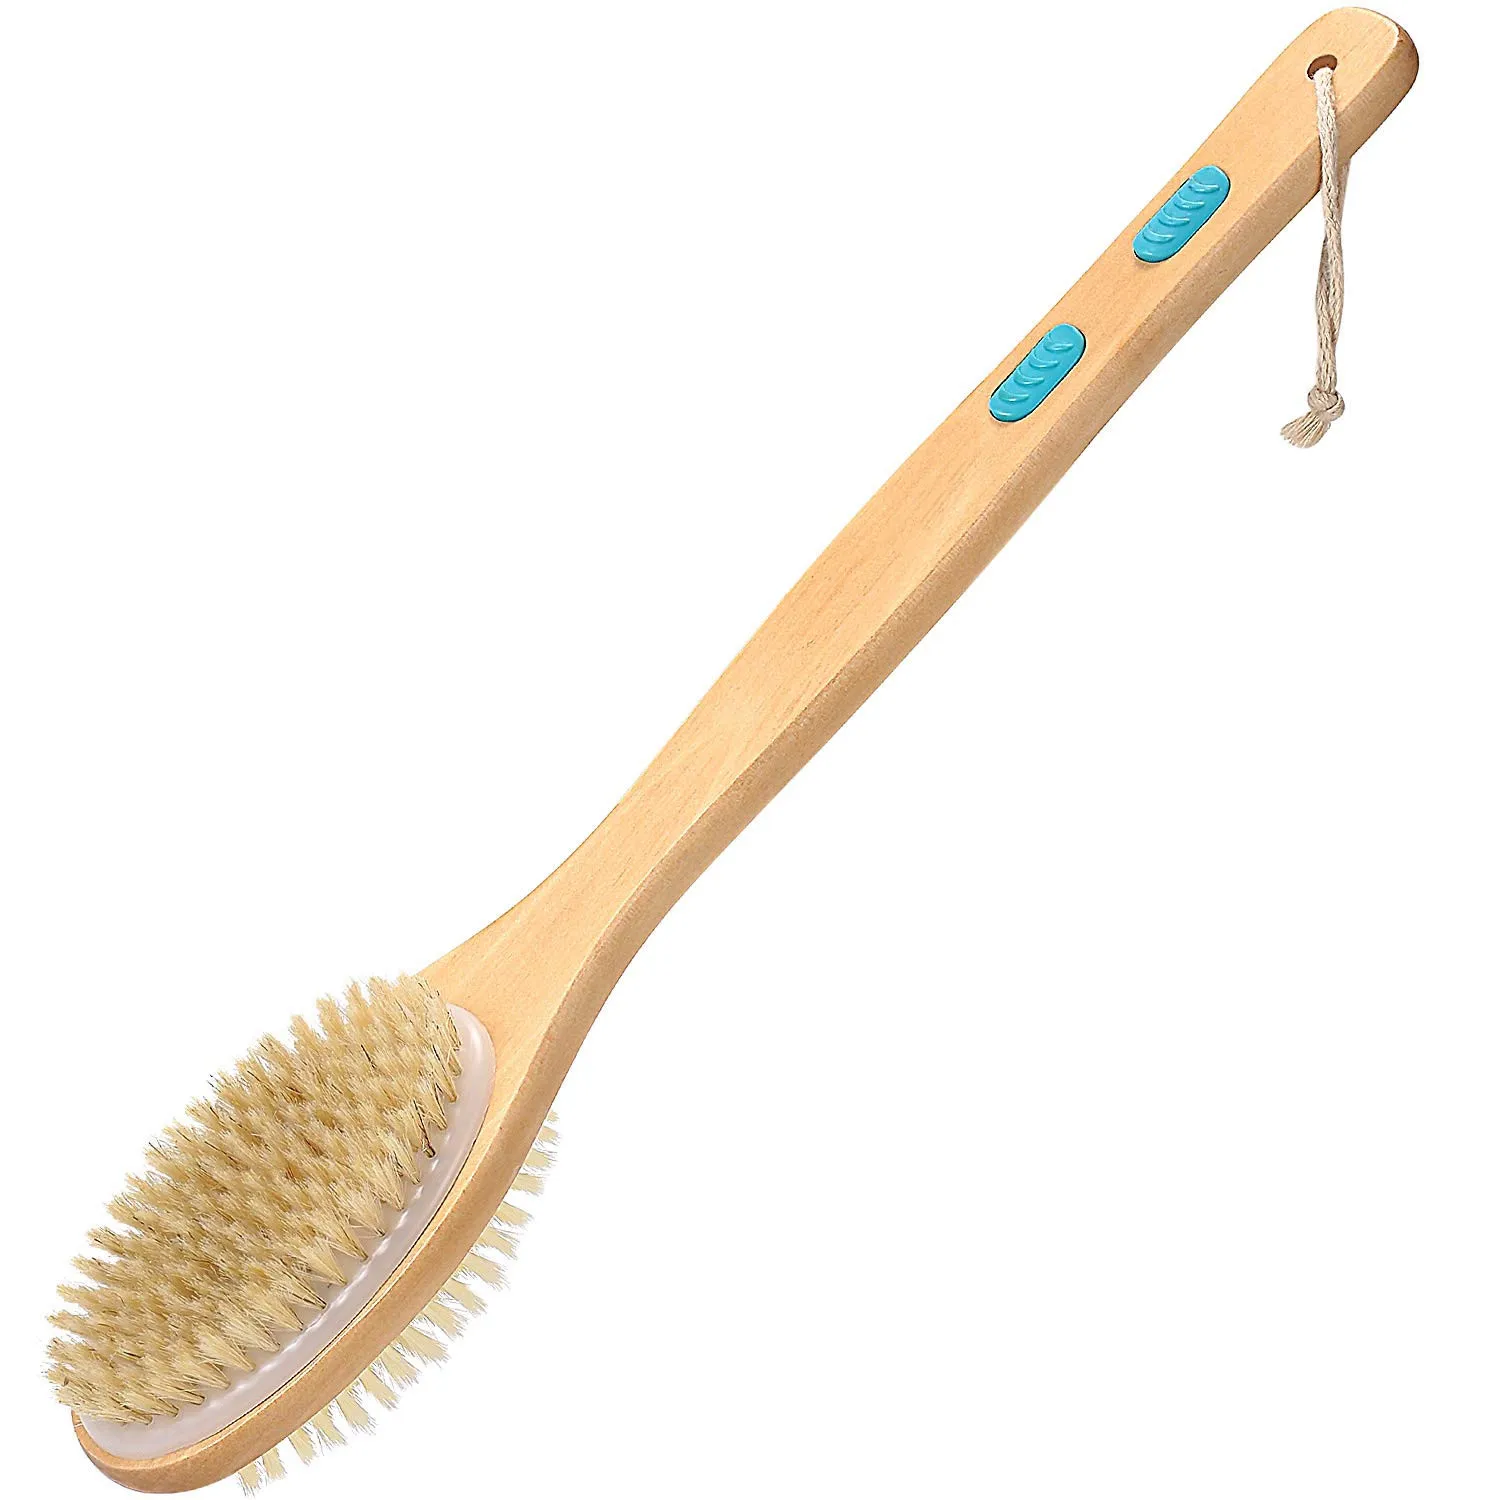 

Factory OEM Double Sided Long Handle Organic Natural Bristle Anti Cellulite Massage Brush Back Bamboo Shower Bath Body Dry Brush, Natural color